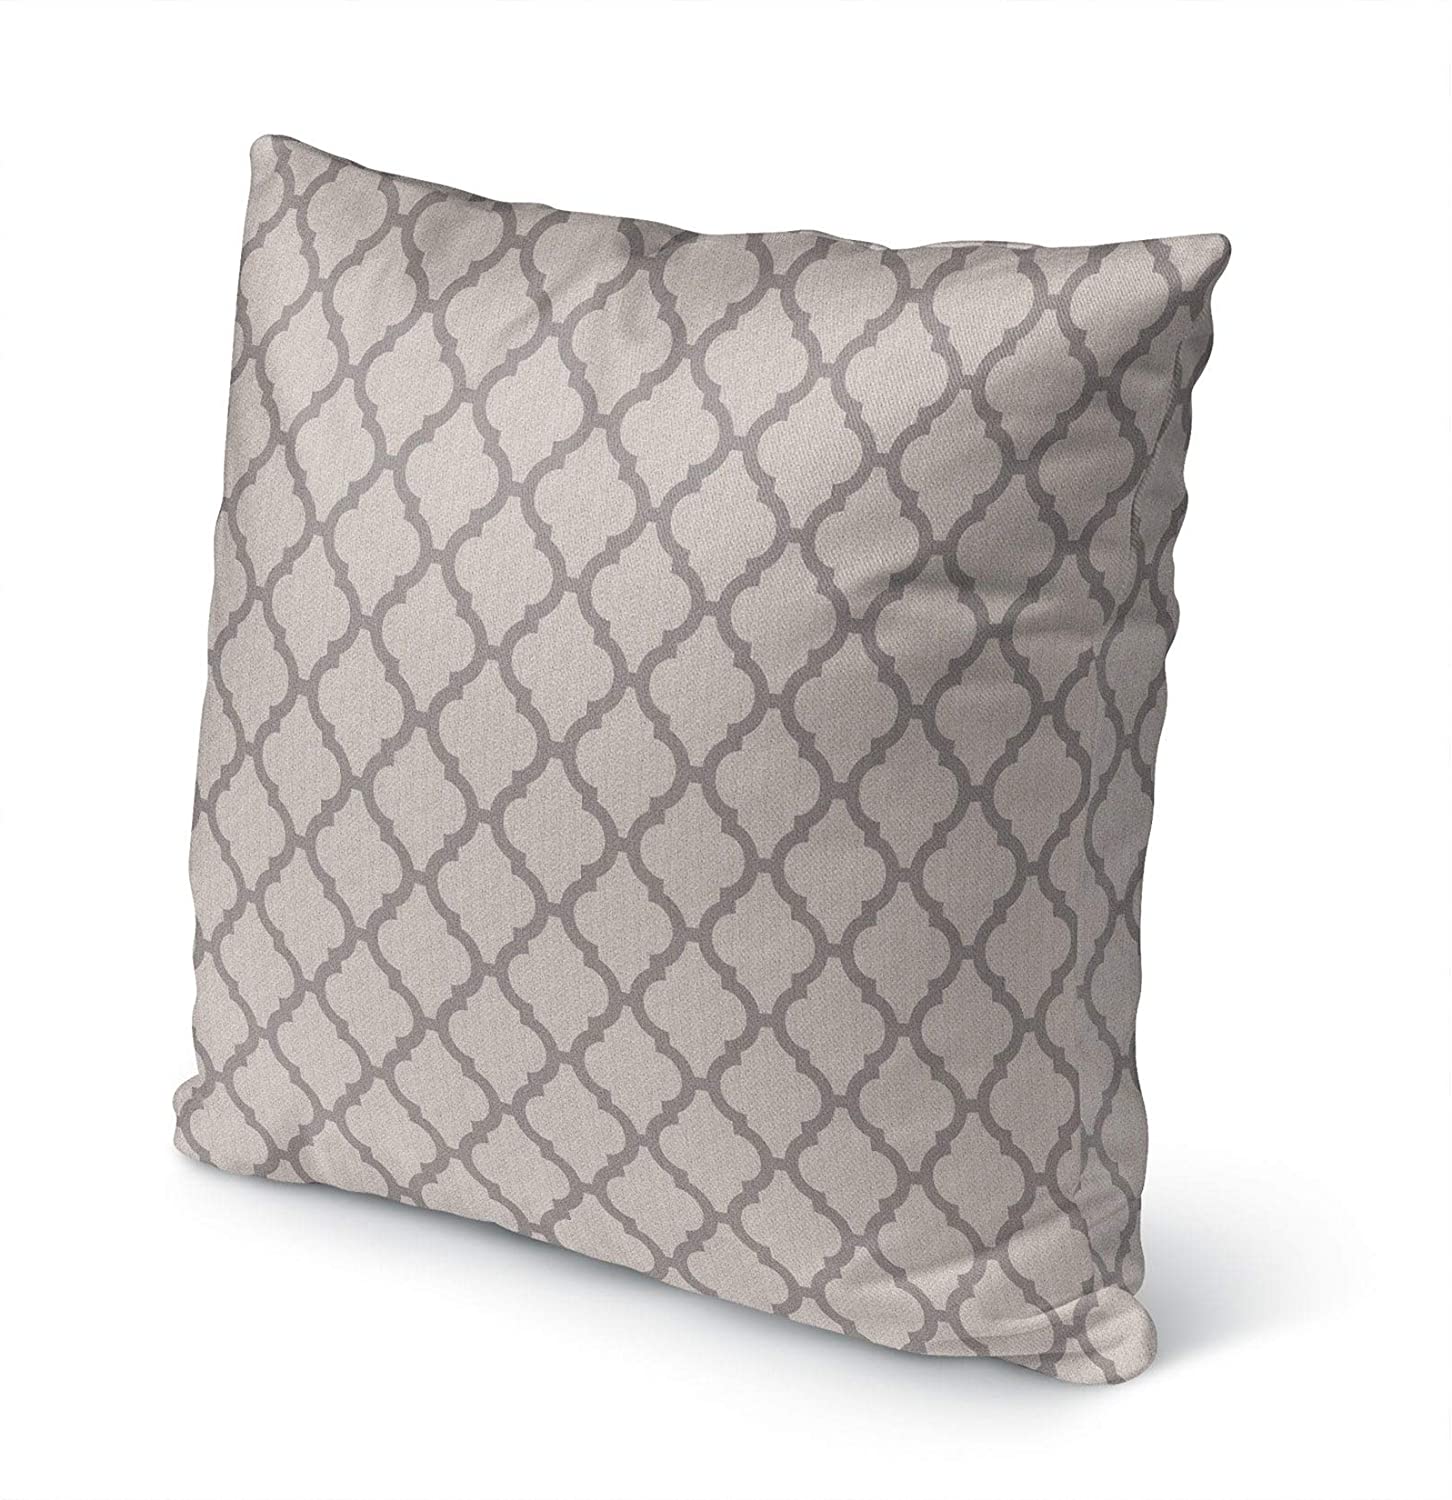 Grey Indoor|Outdoor Pillow by Marina 18x18 Grey Geometric Bohemian Eclectic Polyester Removable Cover